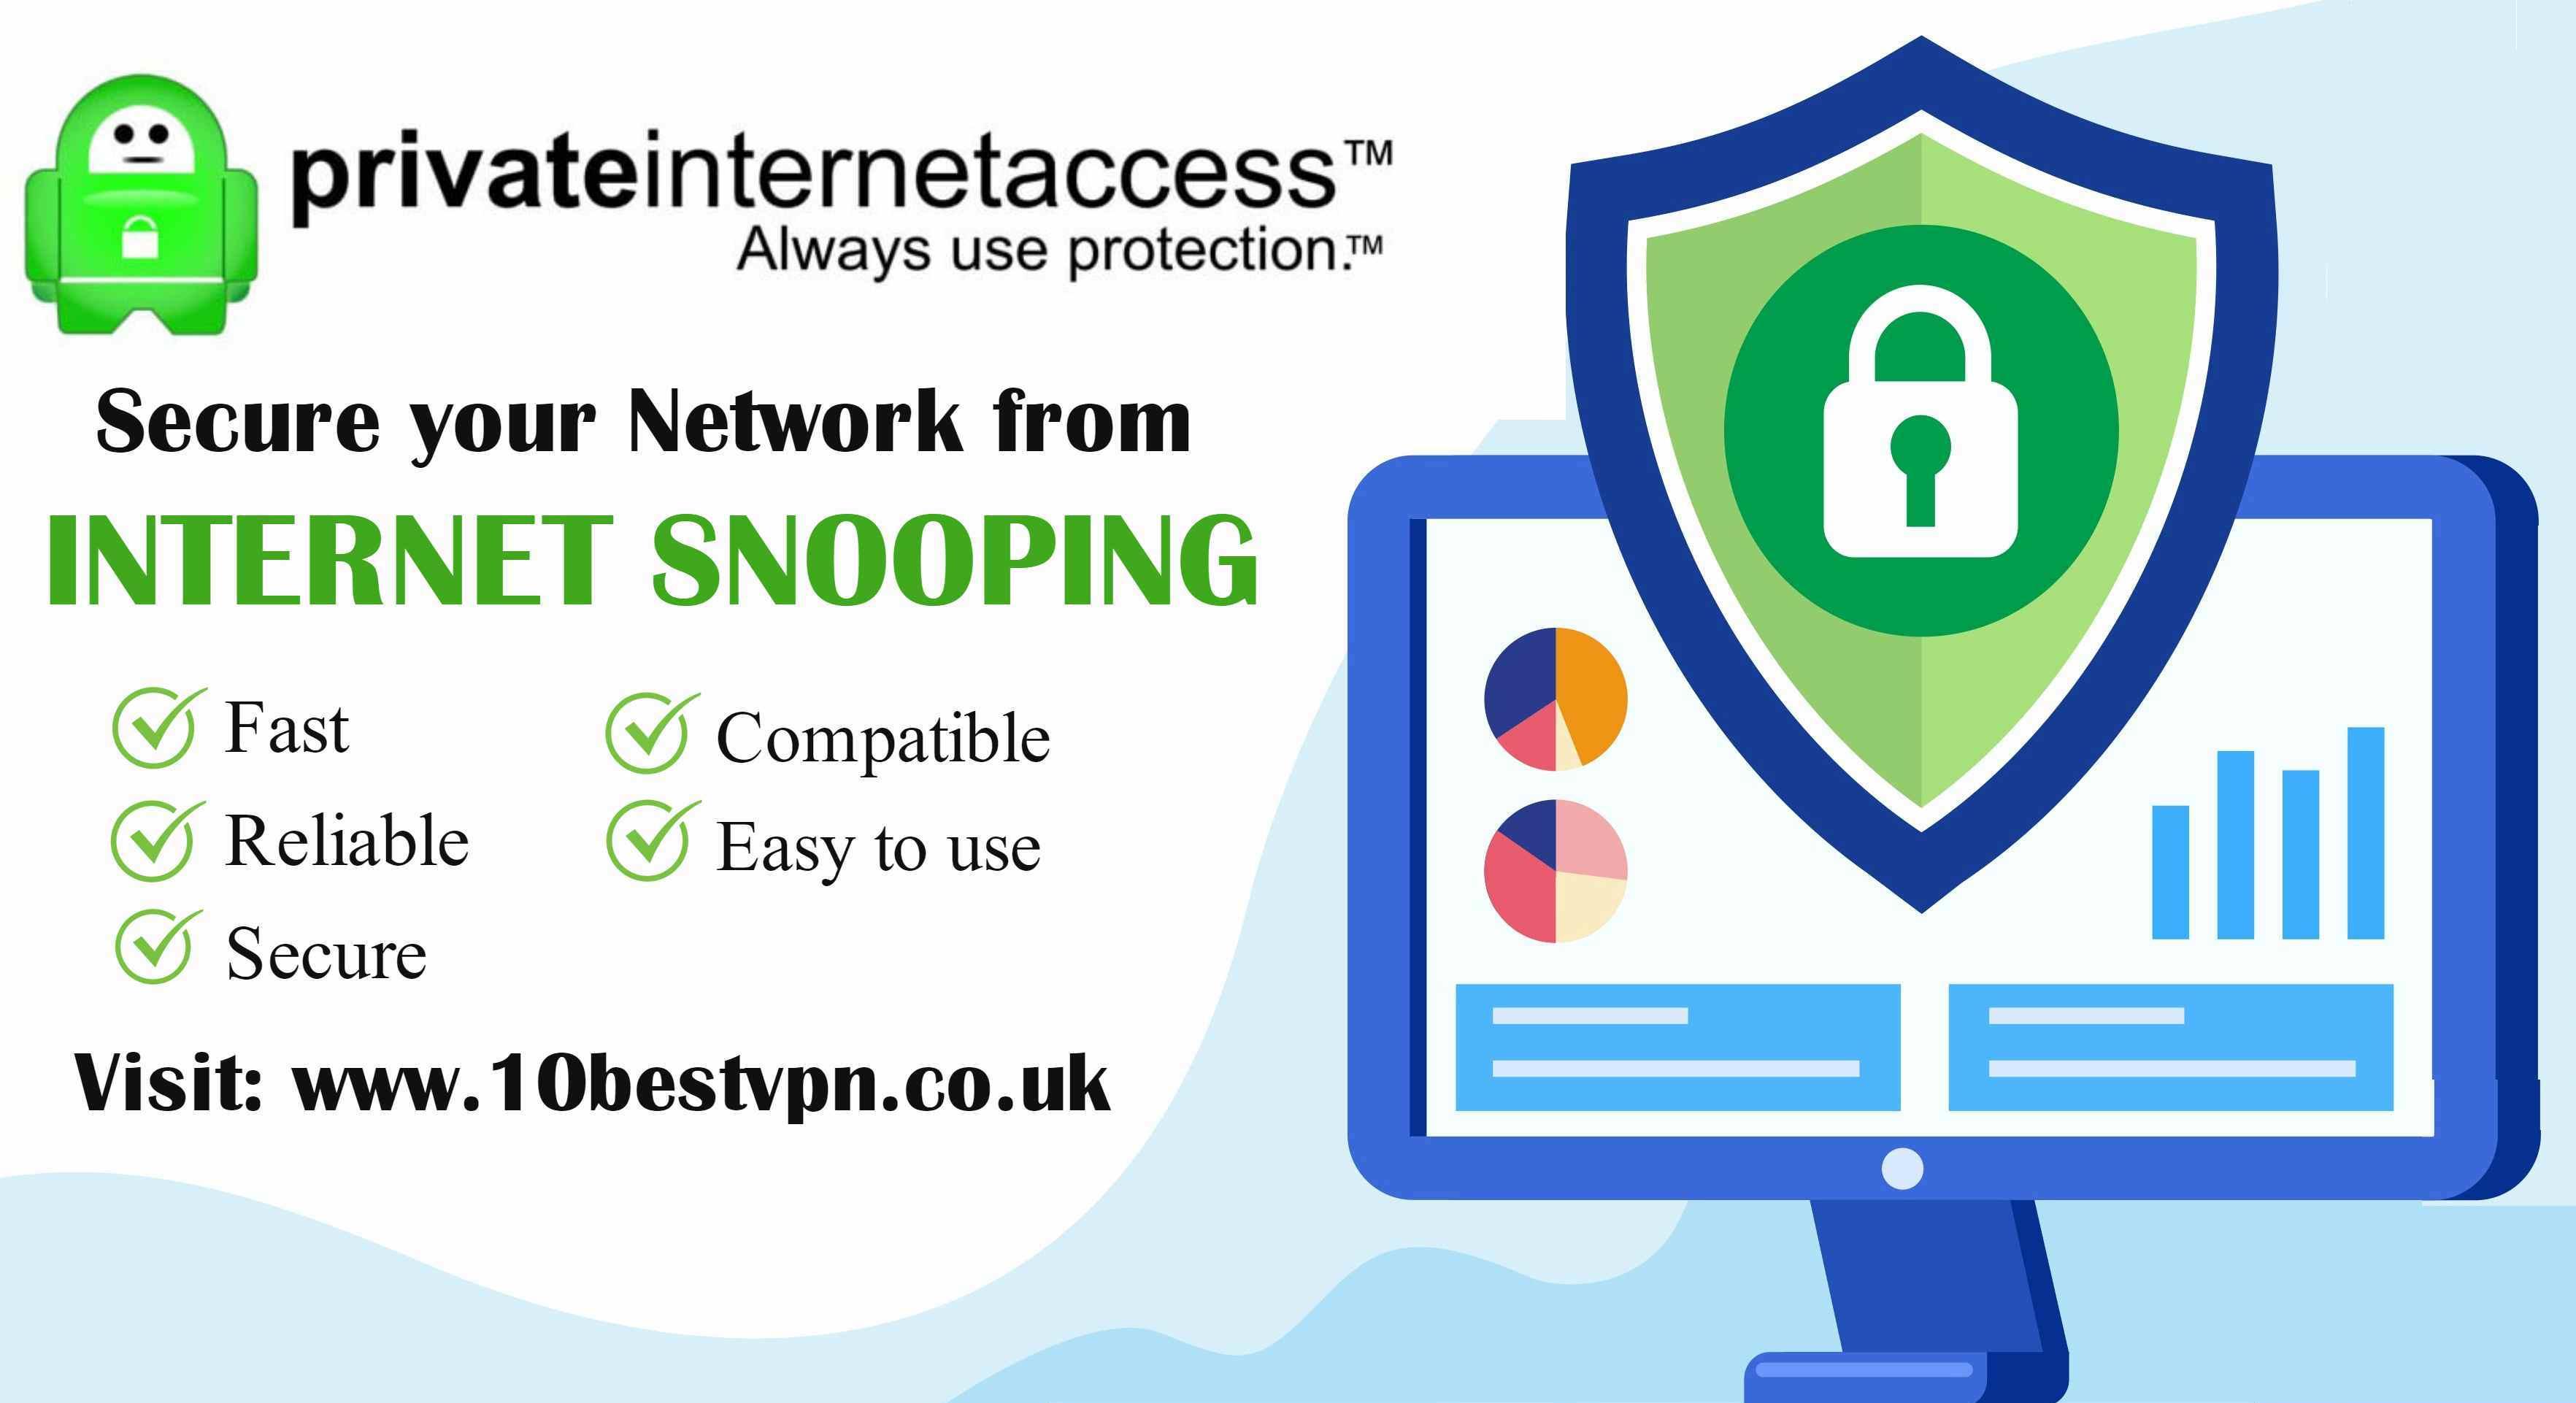 Image - #PrivateInternetAccess VPN is most popular #VPNservices globally. It works maximum #StreamingServices like Am...